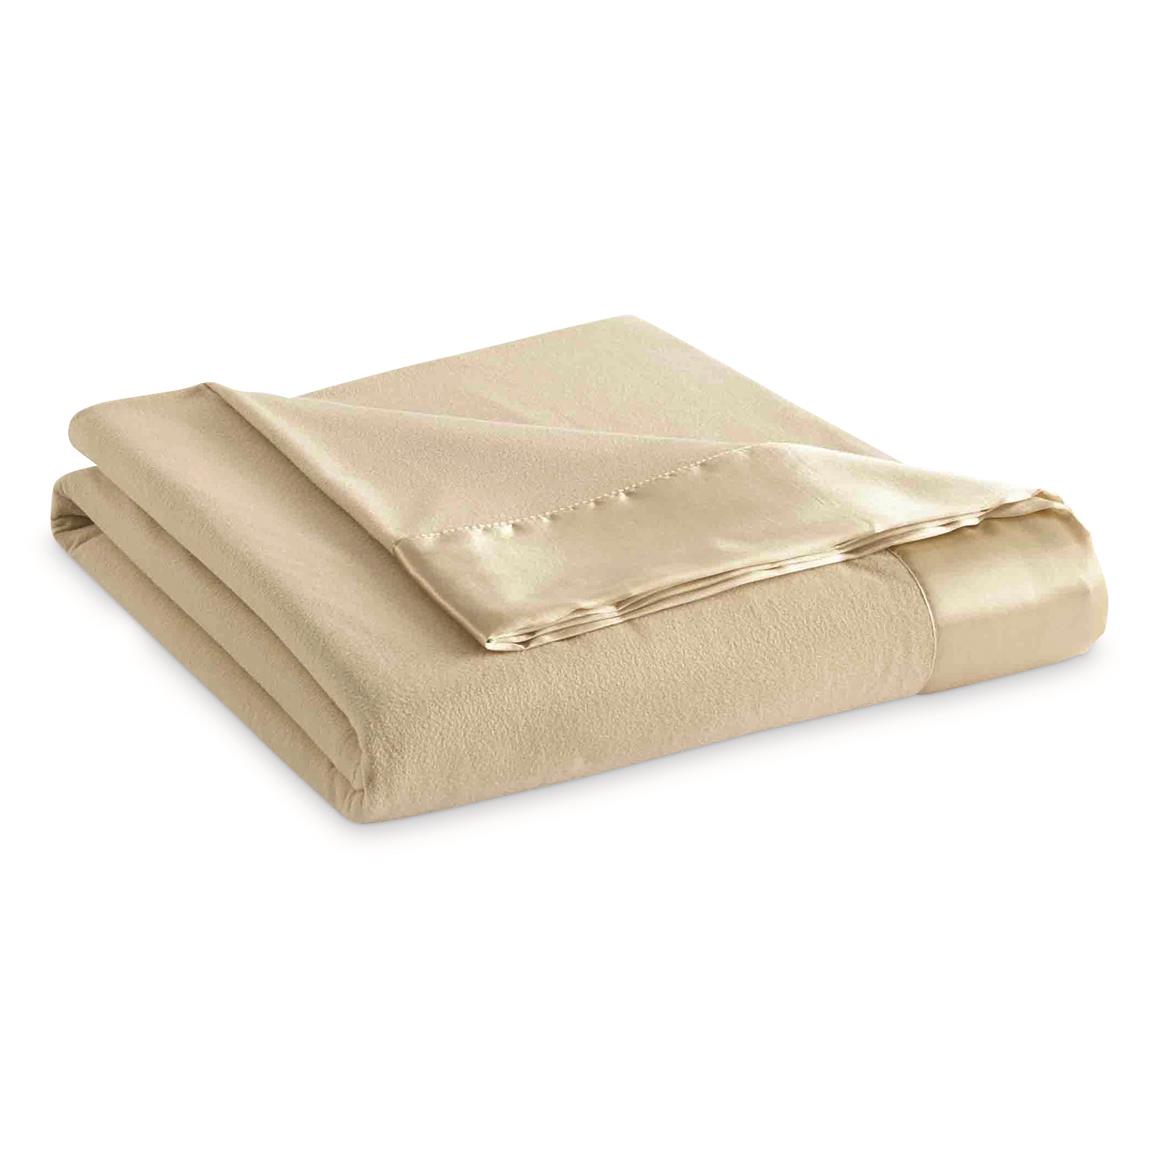 Shavel Home Products All Seasons Blanket, Chino